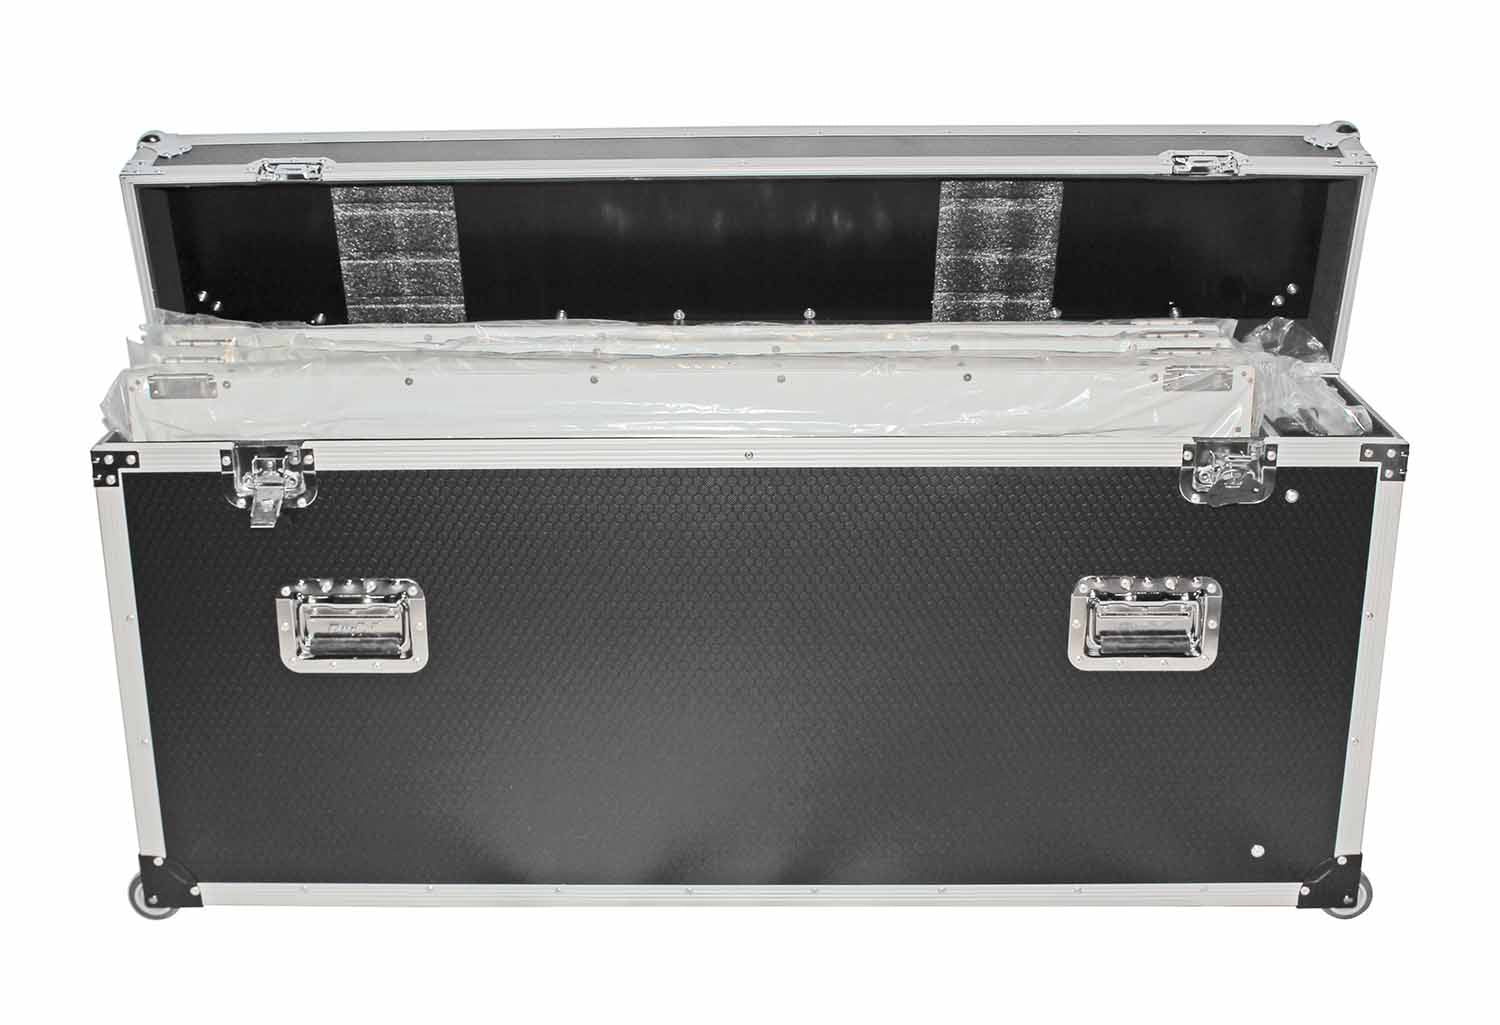 ProX XF-GLOPRO 4XFC, GloPro 4 Panel LED Facade Package with Flight Case - Hollywood DJ